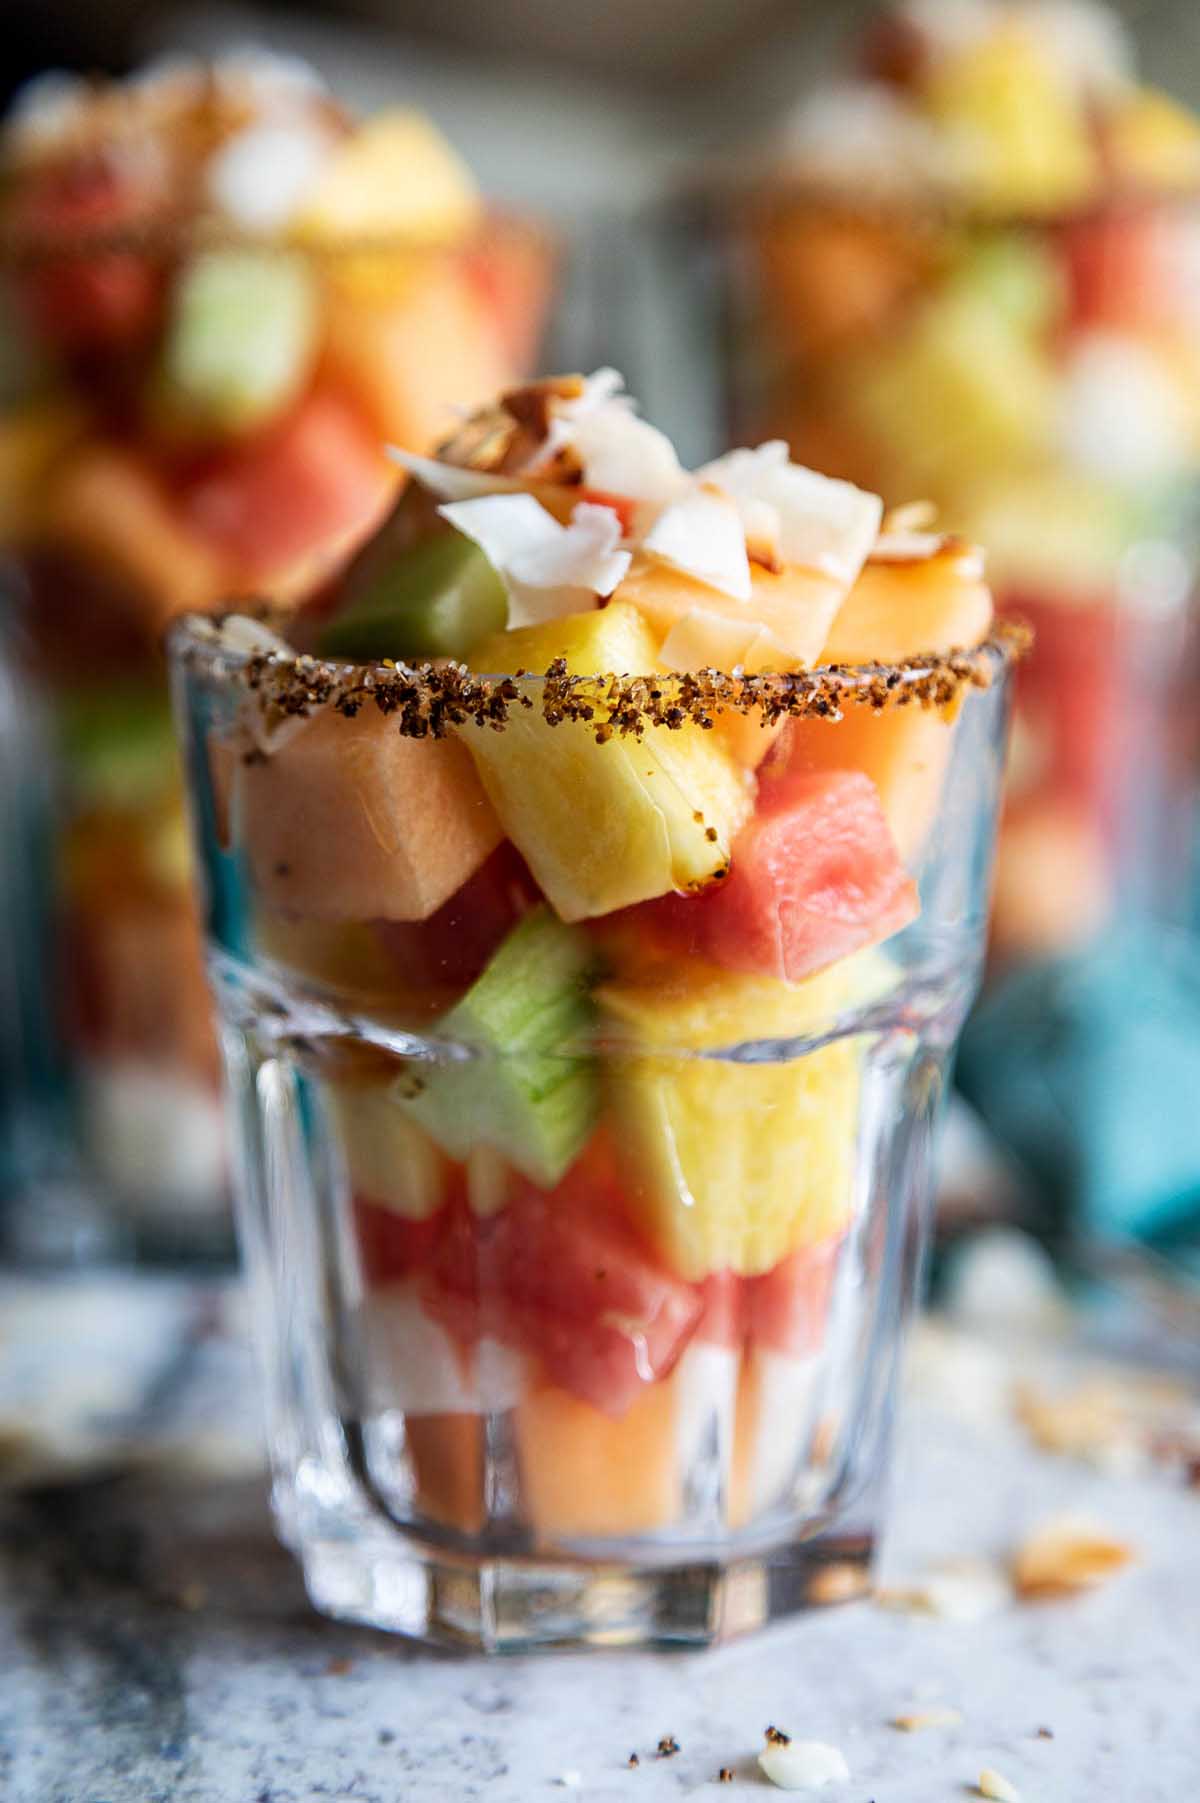 https://www.lucismorsels.com/wp-content/uploads/2015/05/FT-Mexican-Fruit-Cup.jpg